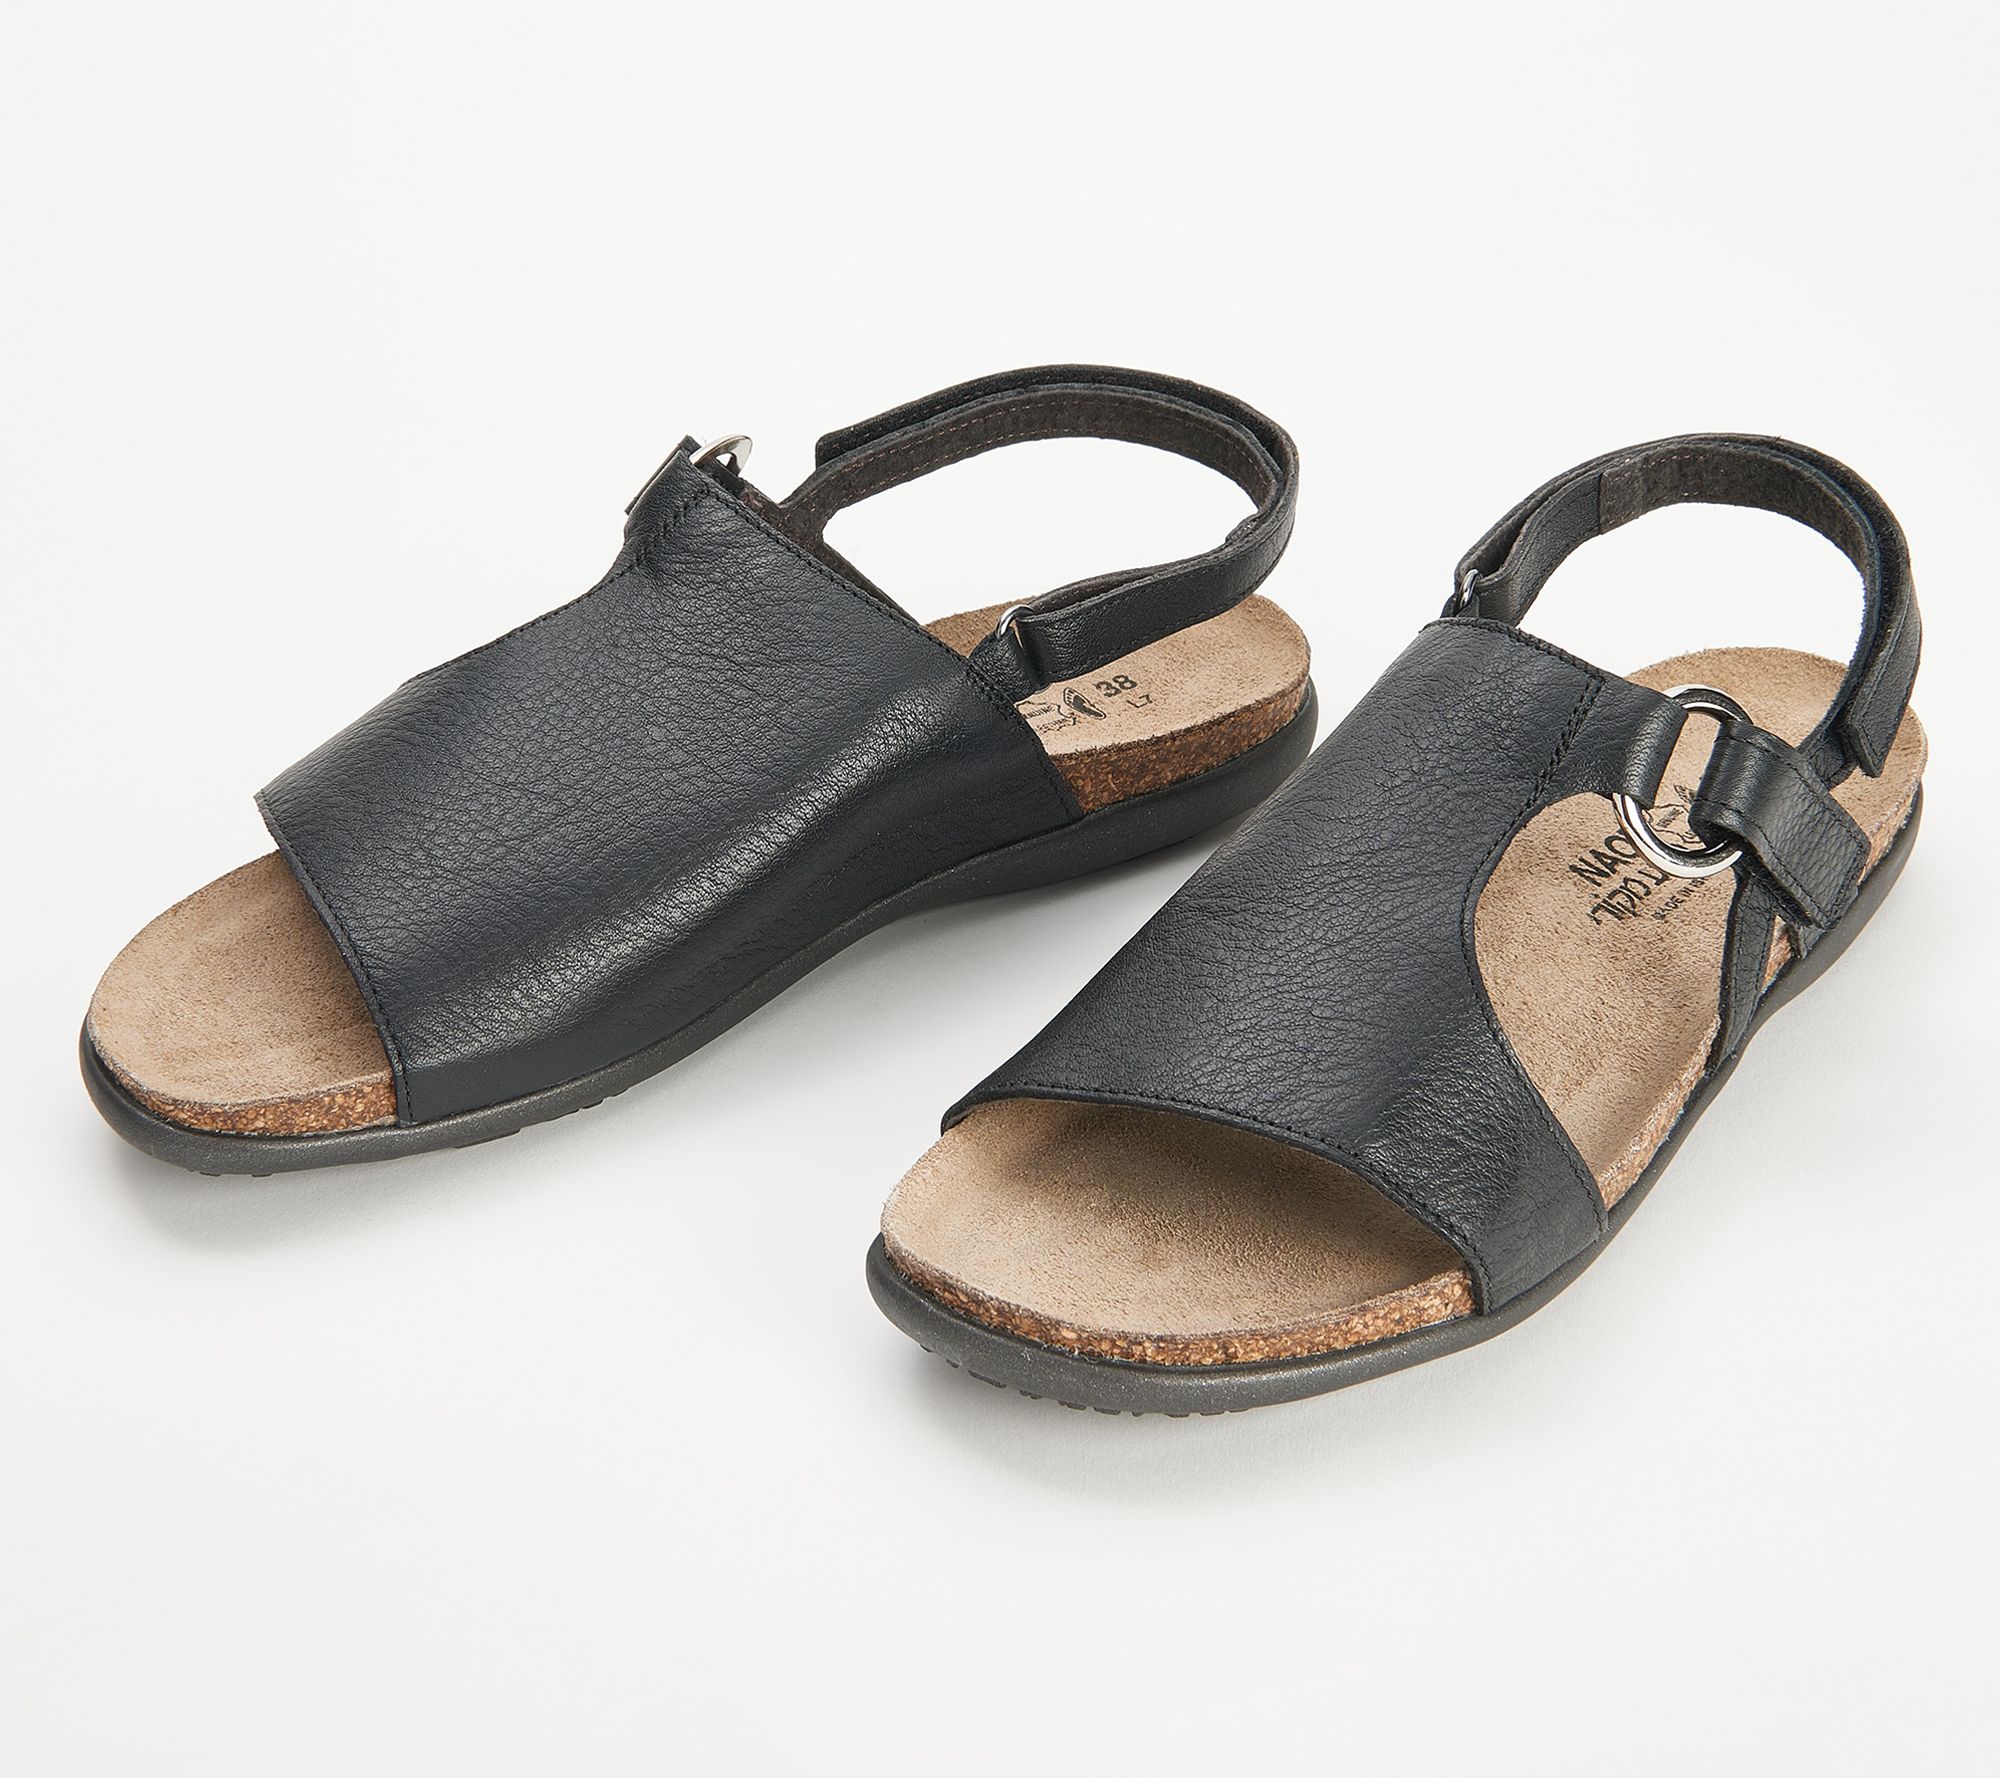 leather sandals for women,with adjustable straps